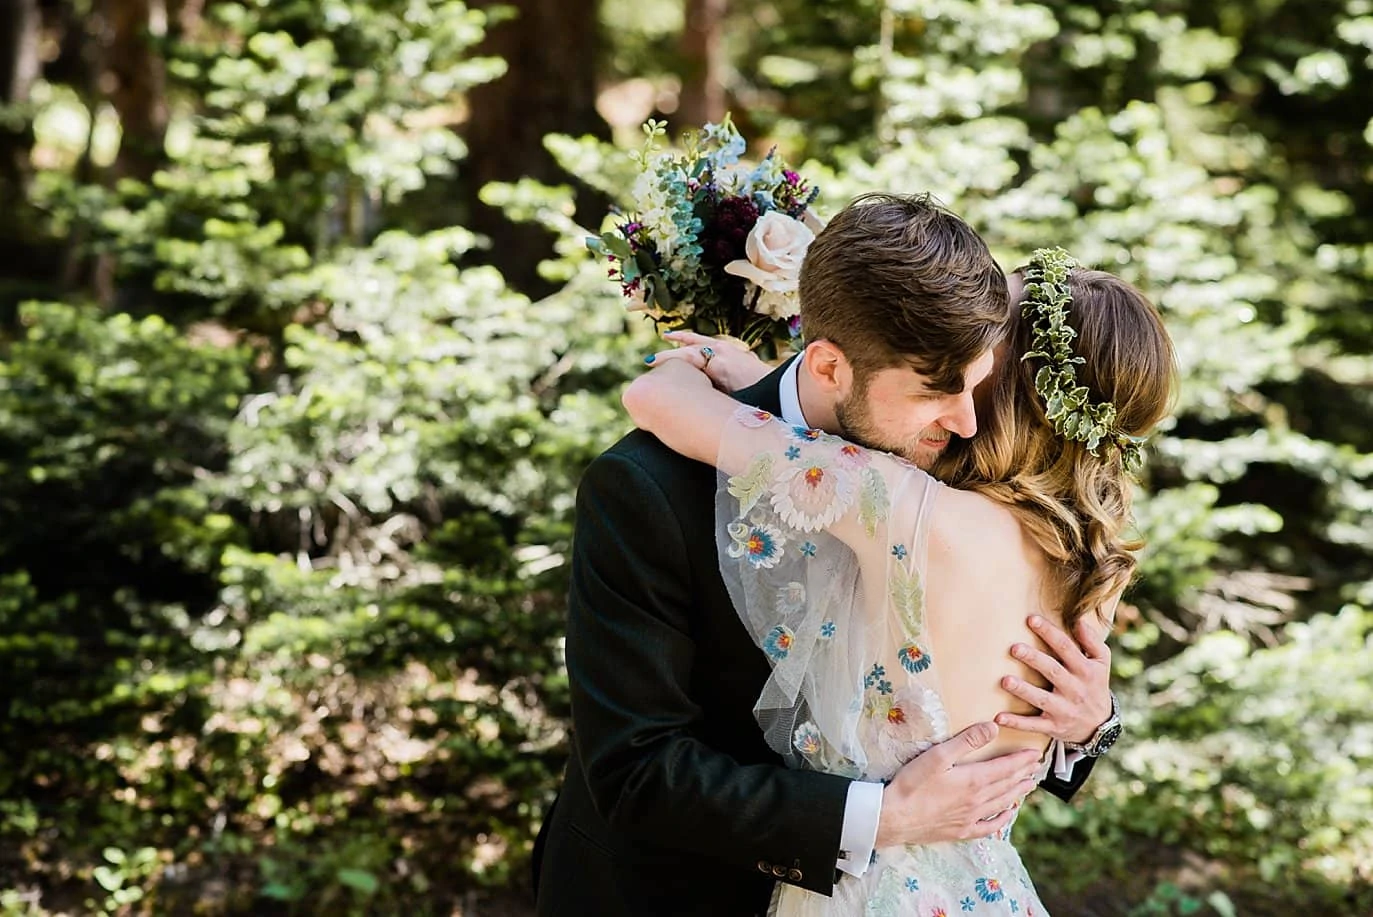 bride and groom embrace after first look in trees at Arapahoe Basin wedding by Breckenridge wedding photographer Jennie Crate